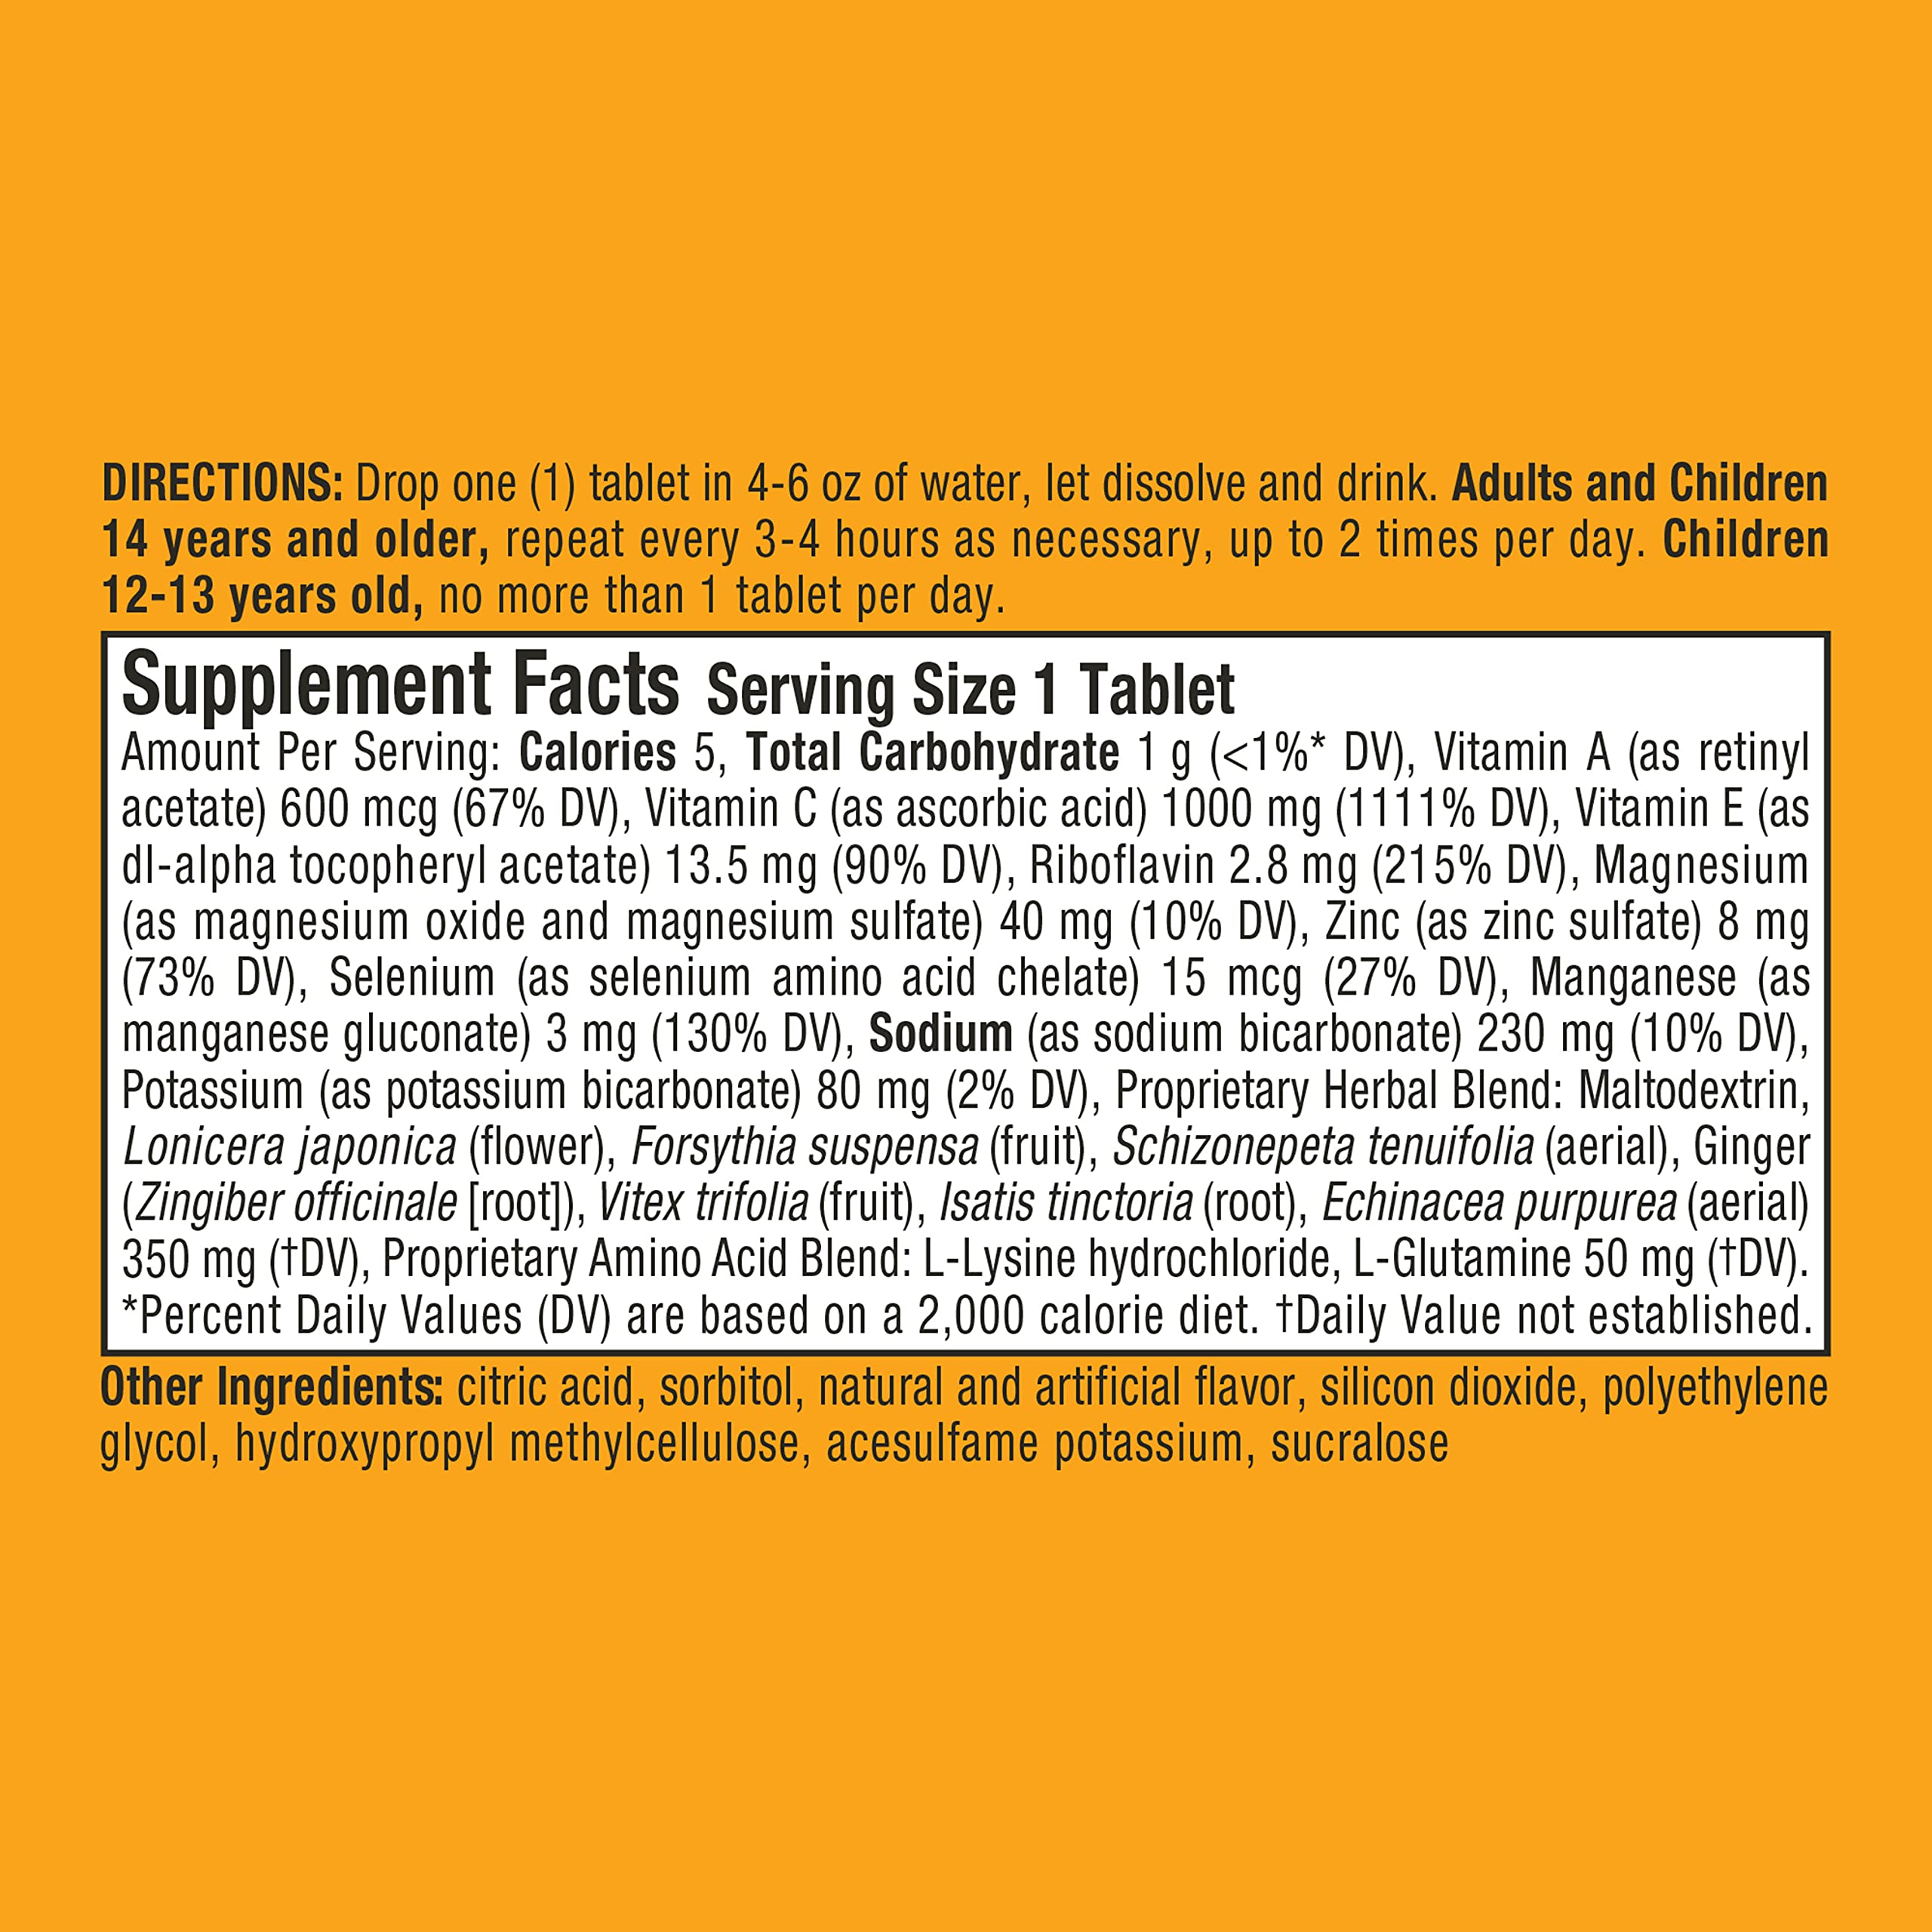 Airborne Vitamin C 1000mg (per serving) - Zesty Orange Effervescent Tablets (10 count box), Gluten-Free Immune Support Supplement, With Vitamins A C E, ZINC, Selenium, Echinacea & Ginger (Pack of 2)